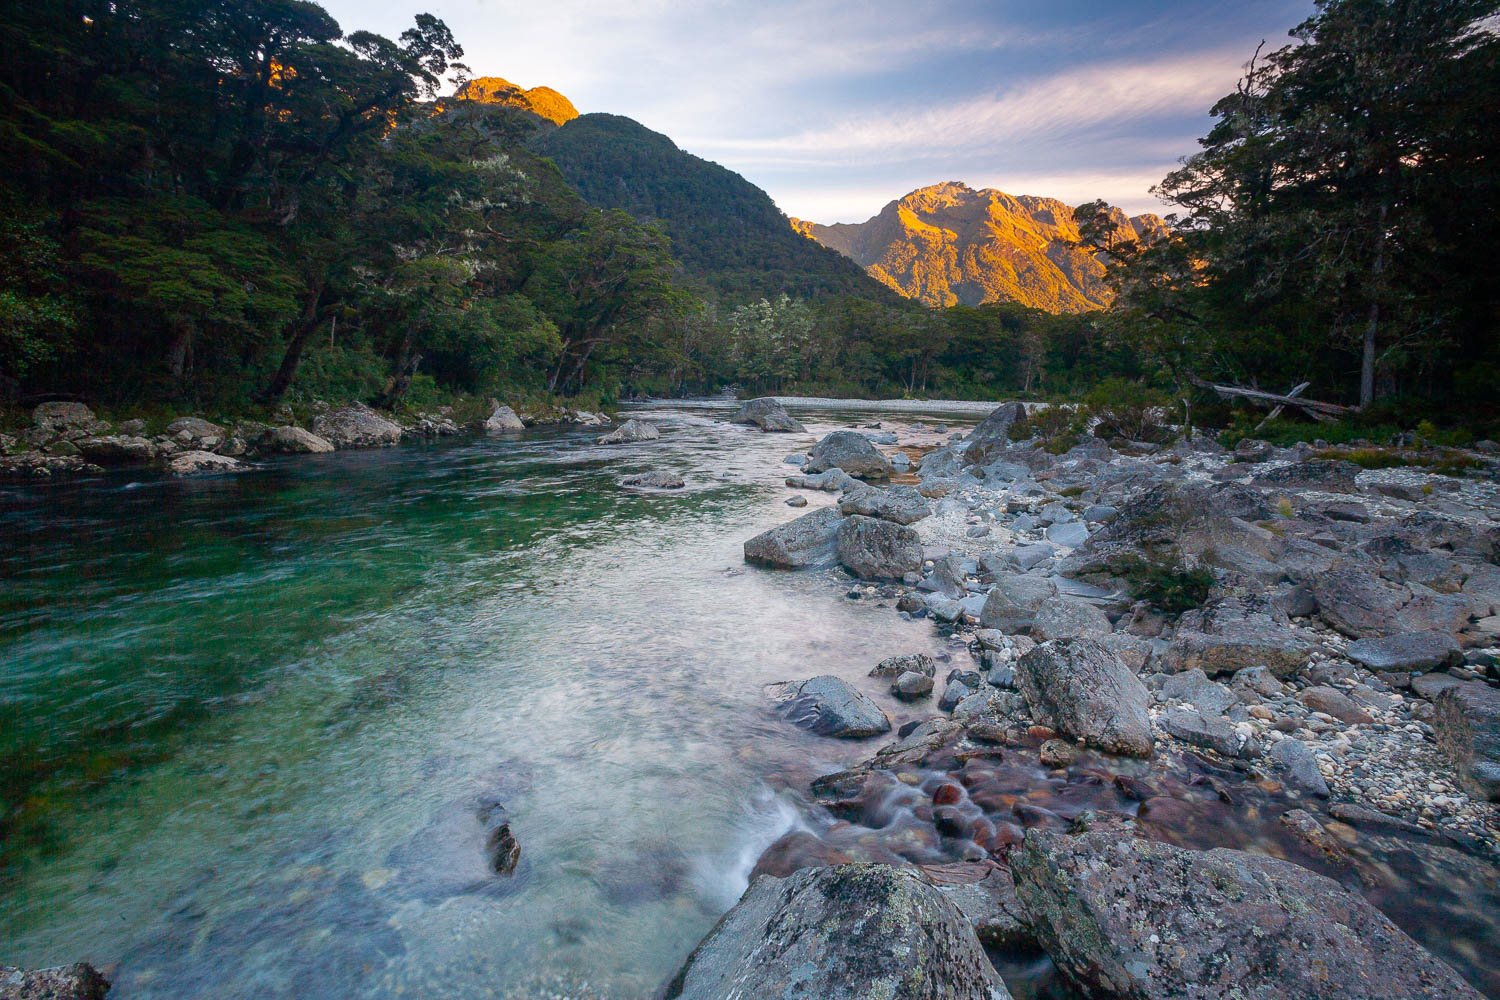 A watercourse with many stones aside, and a lot of greenery on both sides, and a shining mountain peak point in the background, The Clinton River and Earl Mountains at sunset, Milford Track - New Zealand